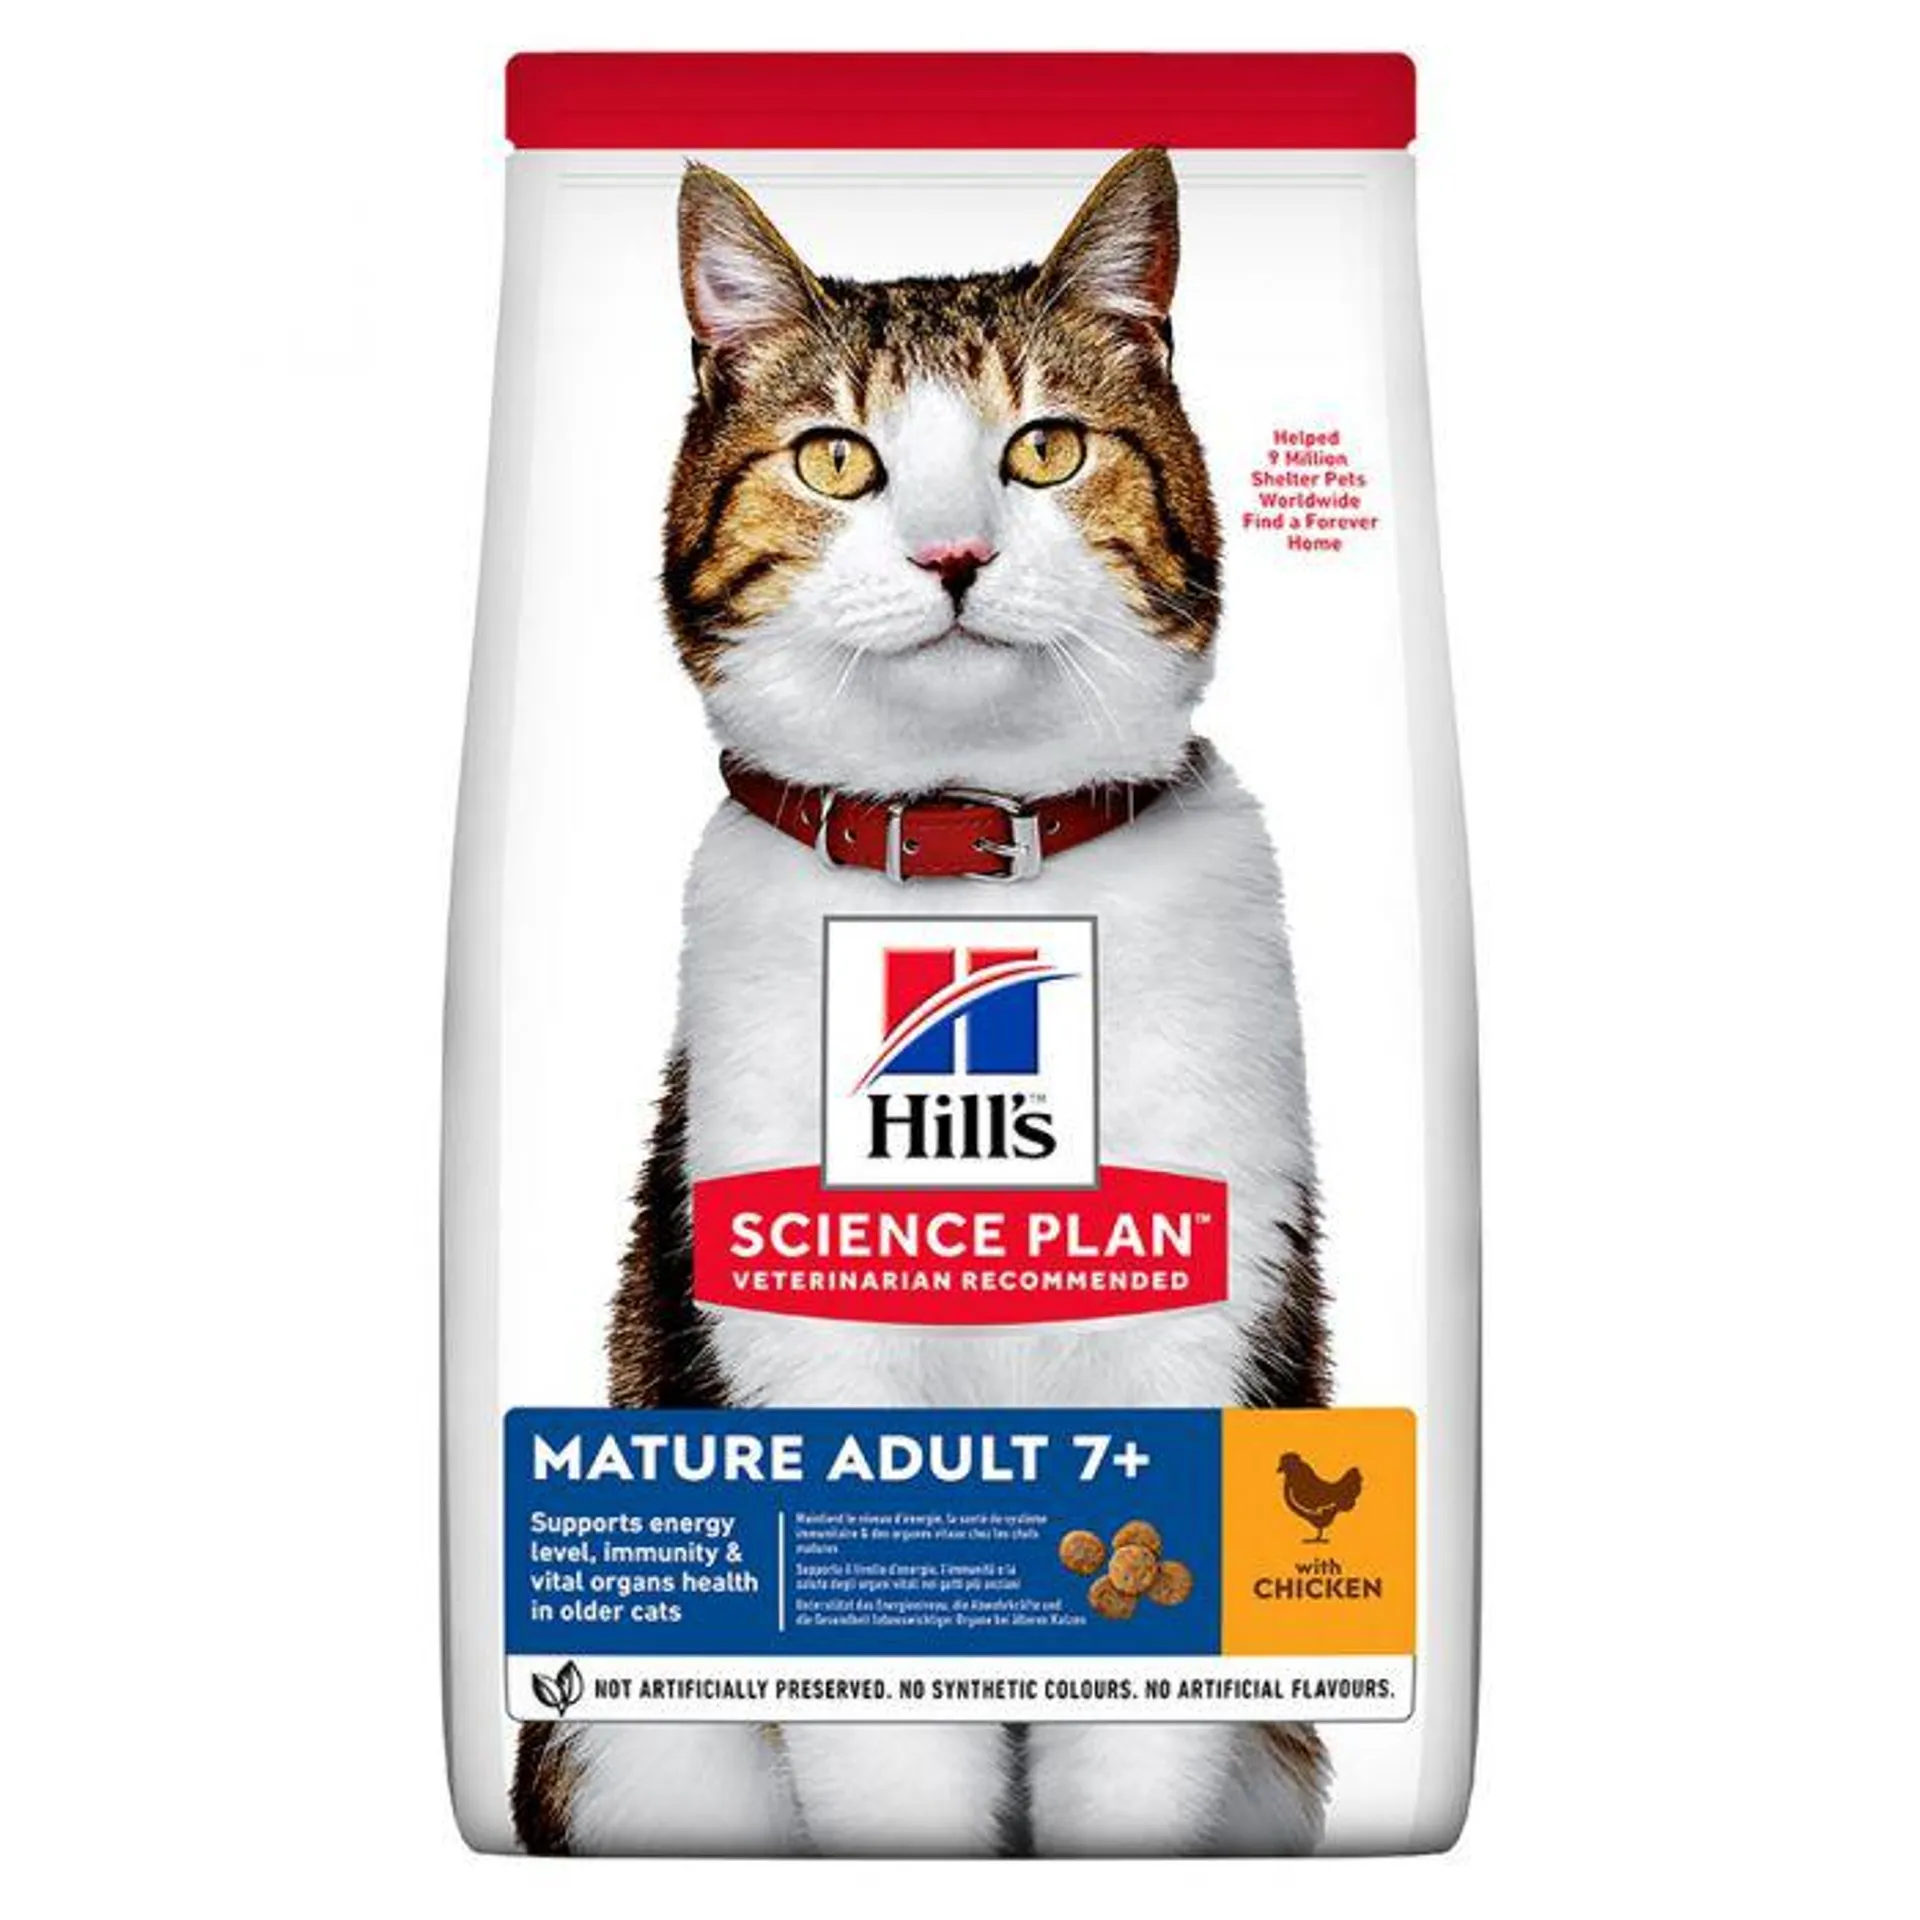 Hills Science Plan Mature Adult Cat Food with Chicken 1.5kg